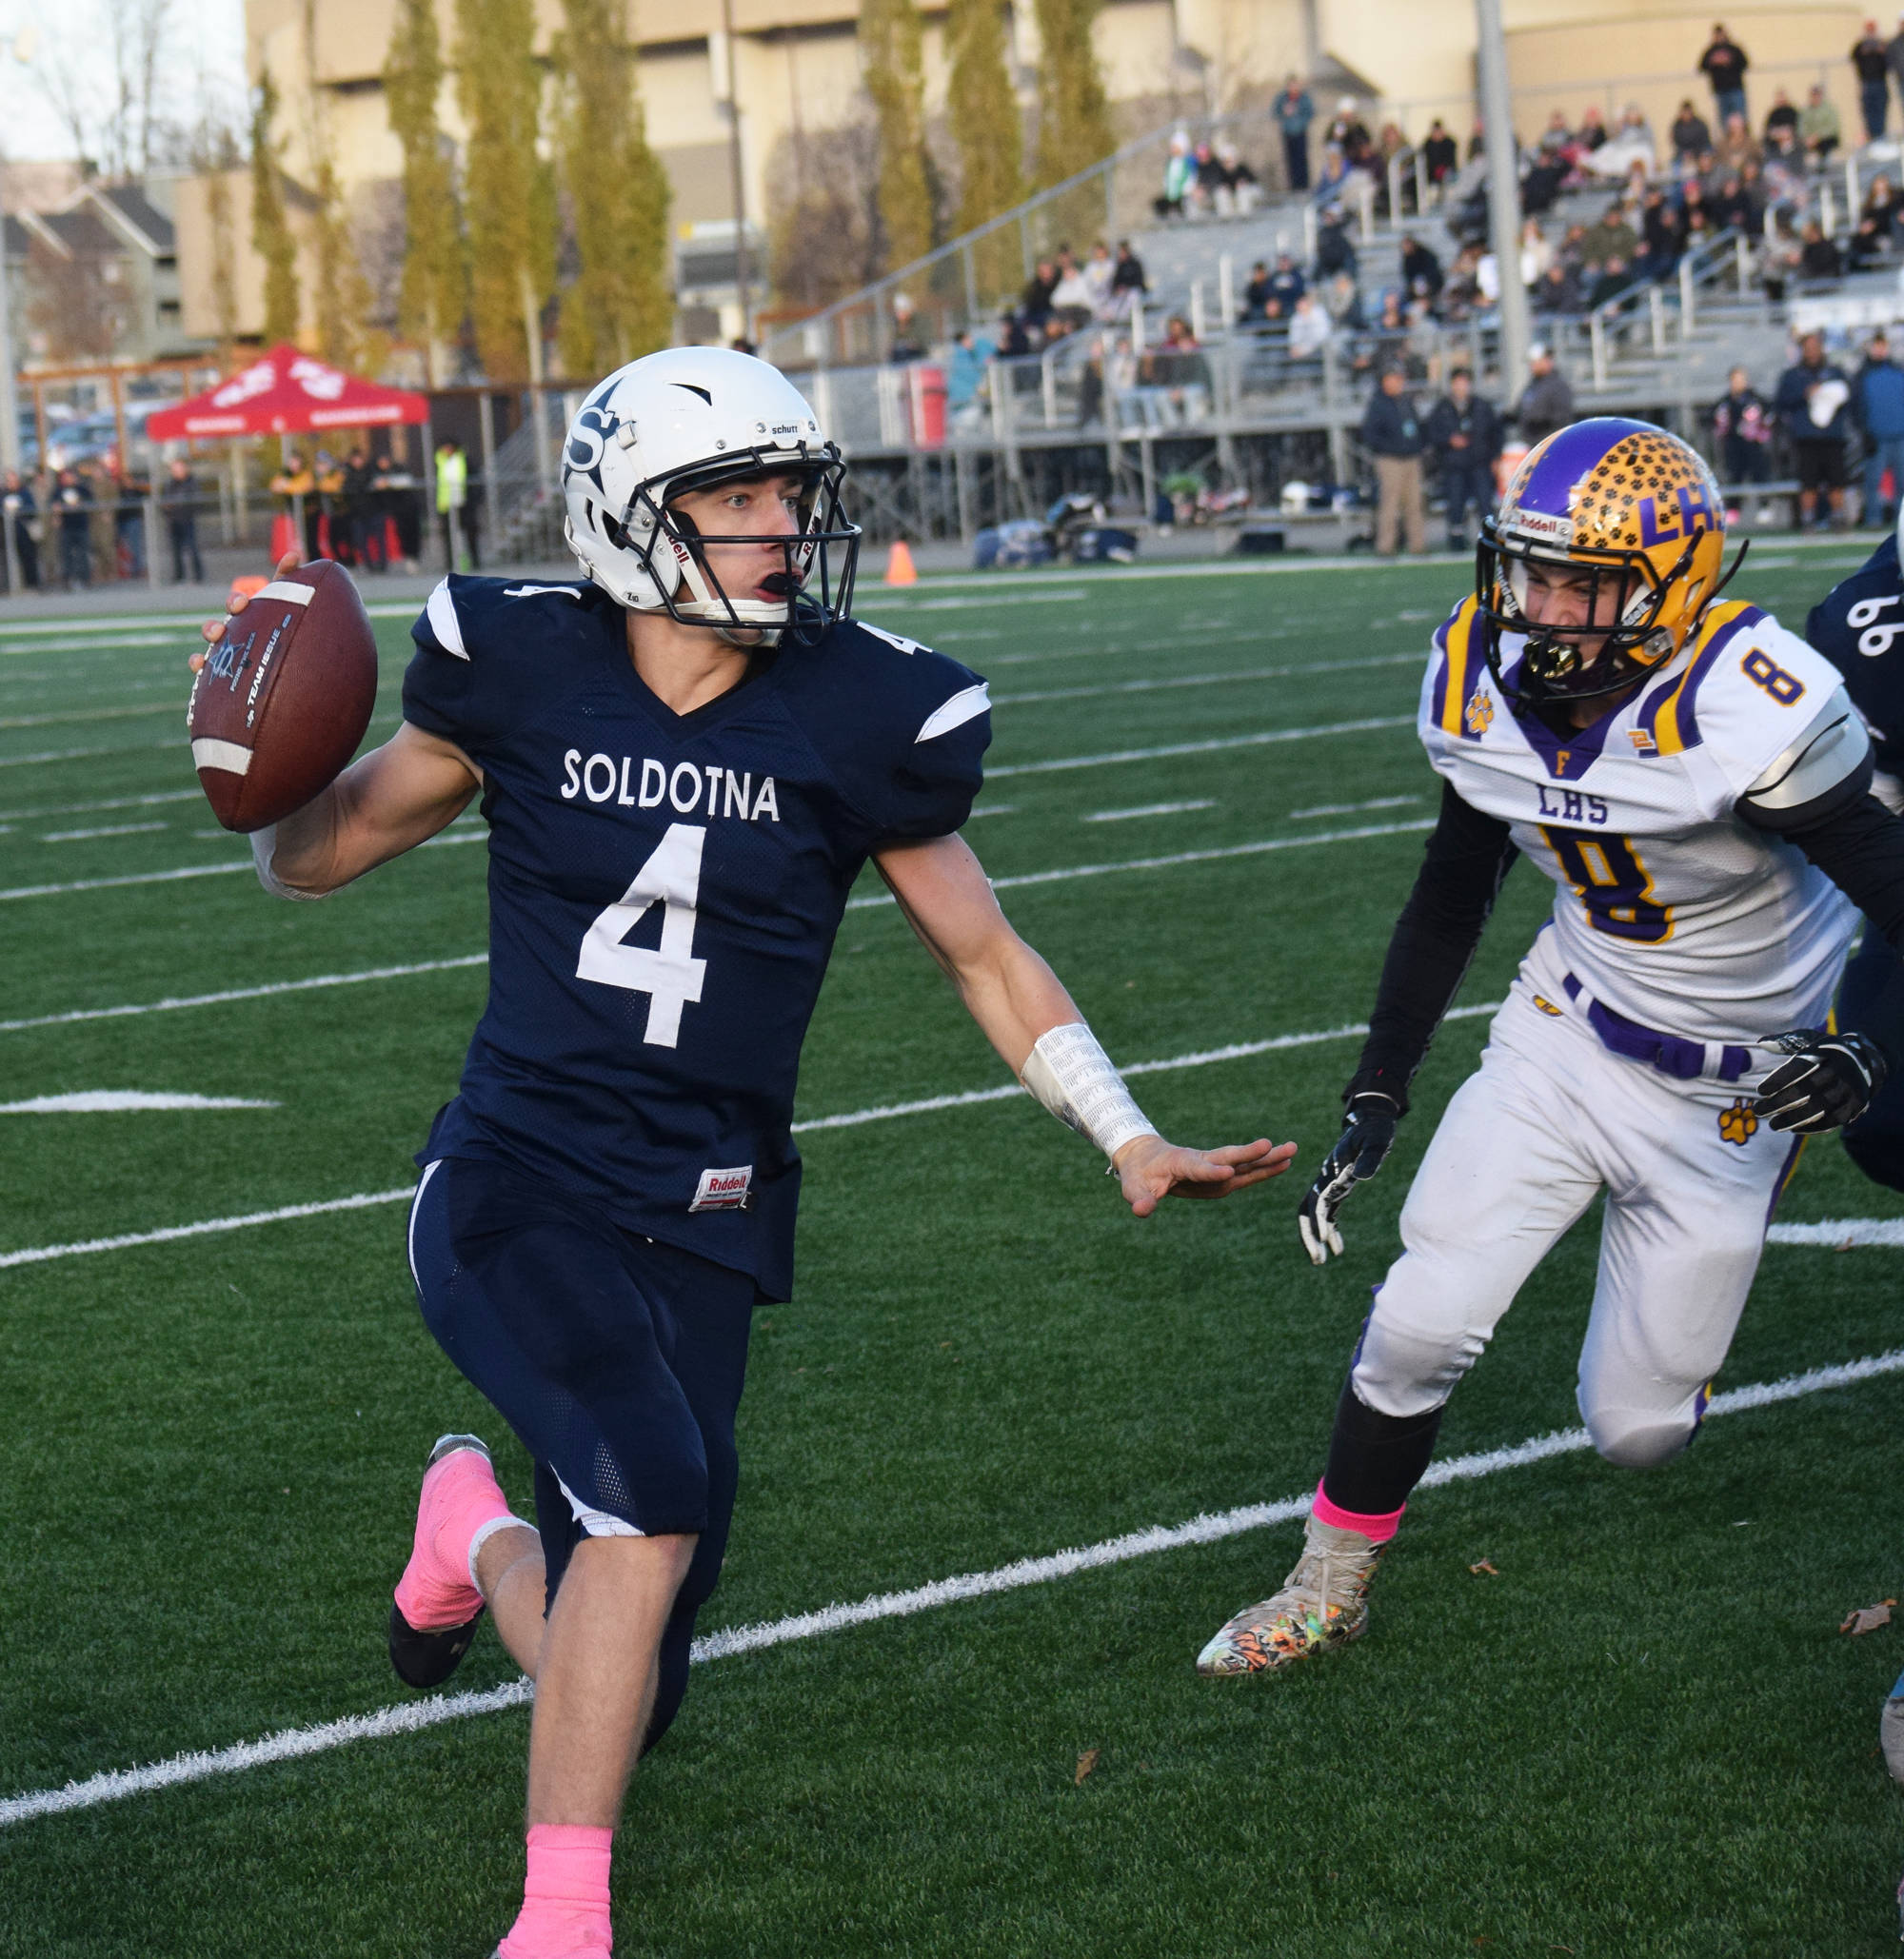 Soldotna’s Jersey Truesdell looks for an open receiver Saturday, Oct. 19, 2019, against Lathrop at the Div. II state football championship at Anchorage Football Stadium in Anchorage, Alaska. (Photo by Joey Klecka/Peninsula Clarion)